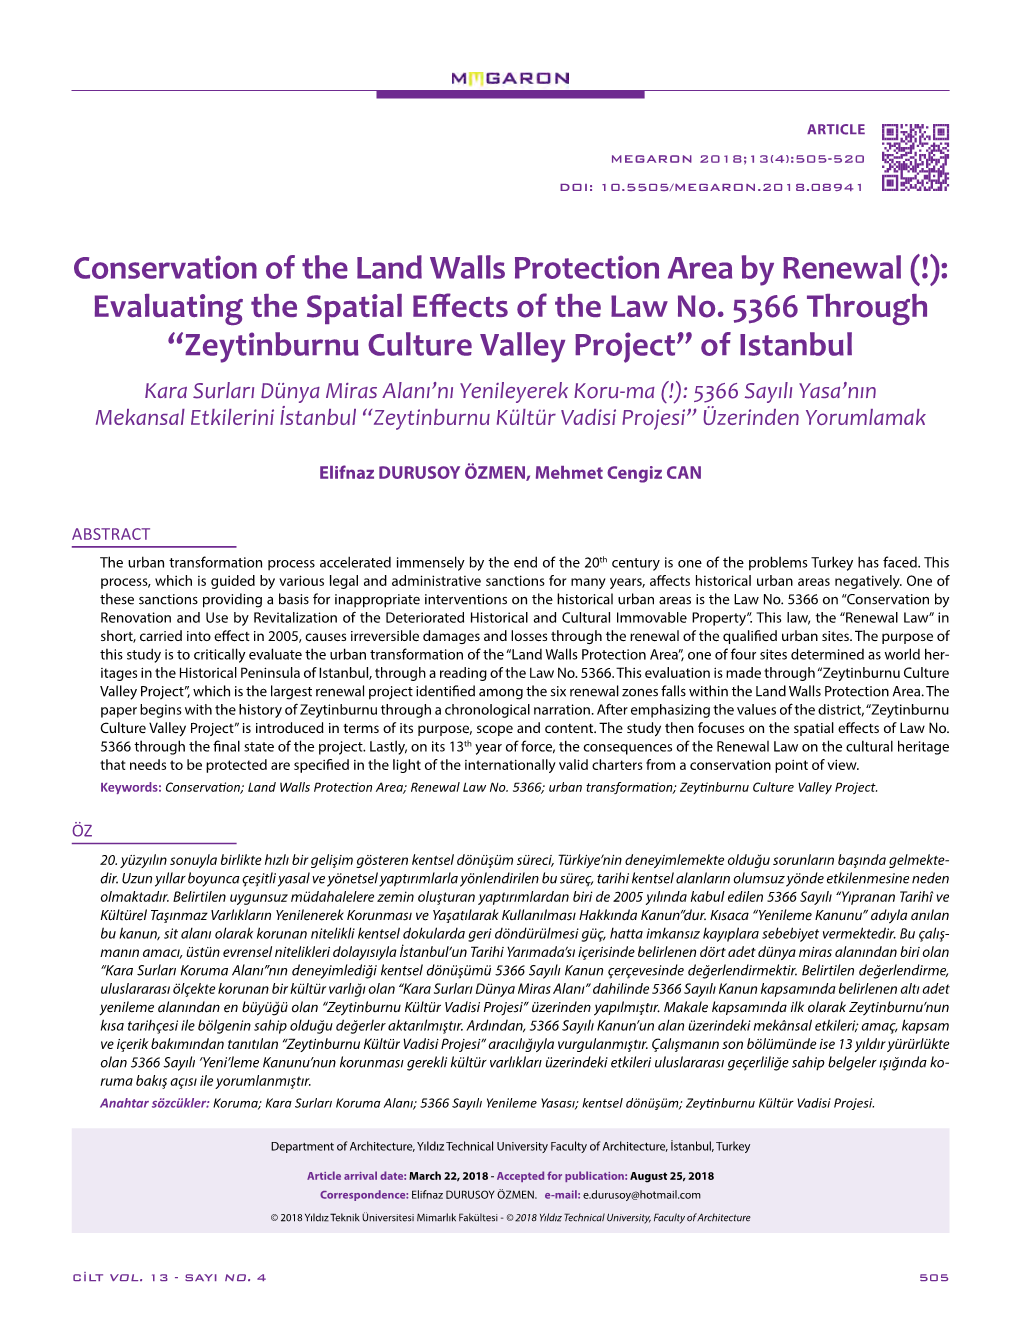 Conservation of the Land Walls Protection Area by Renewal (!): Evaluating the Spatial Effects of the Law No